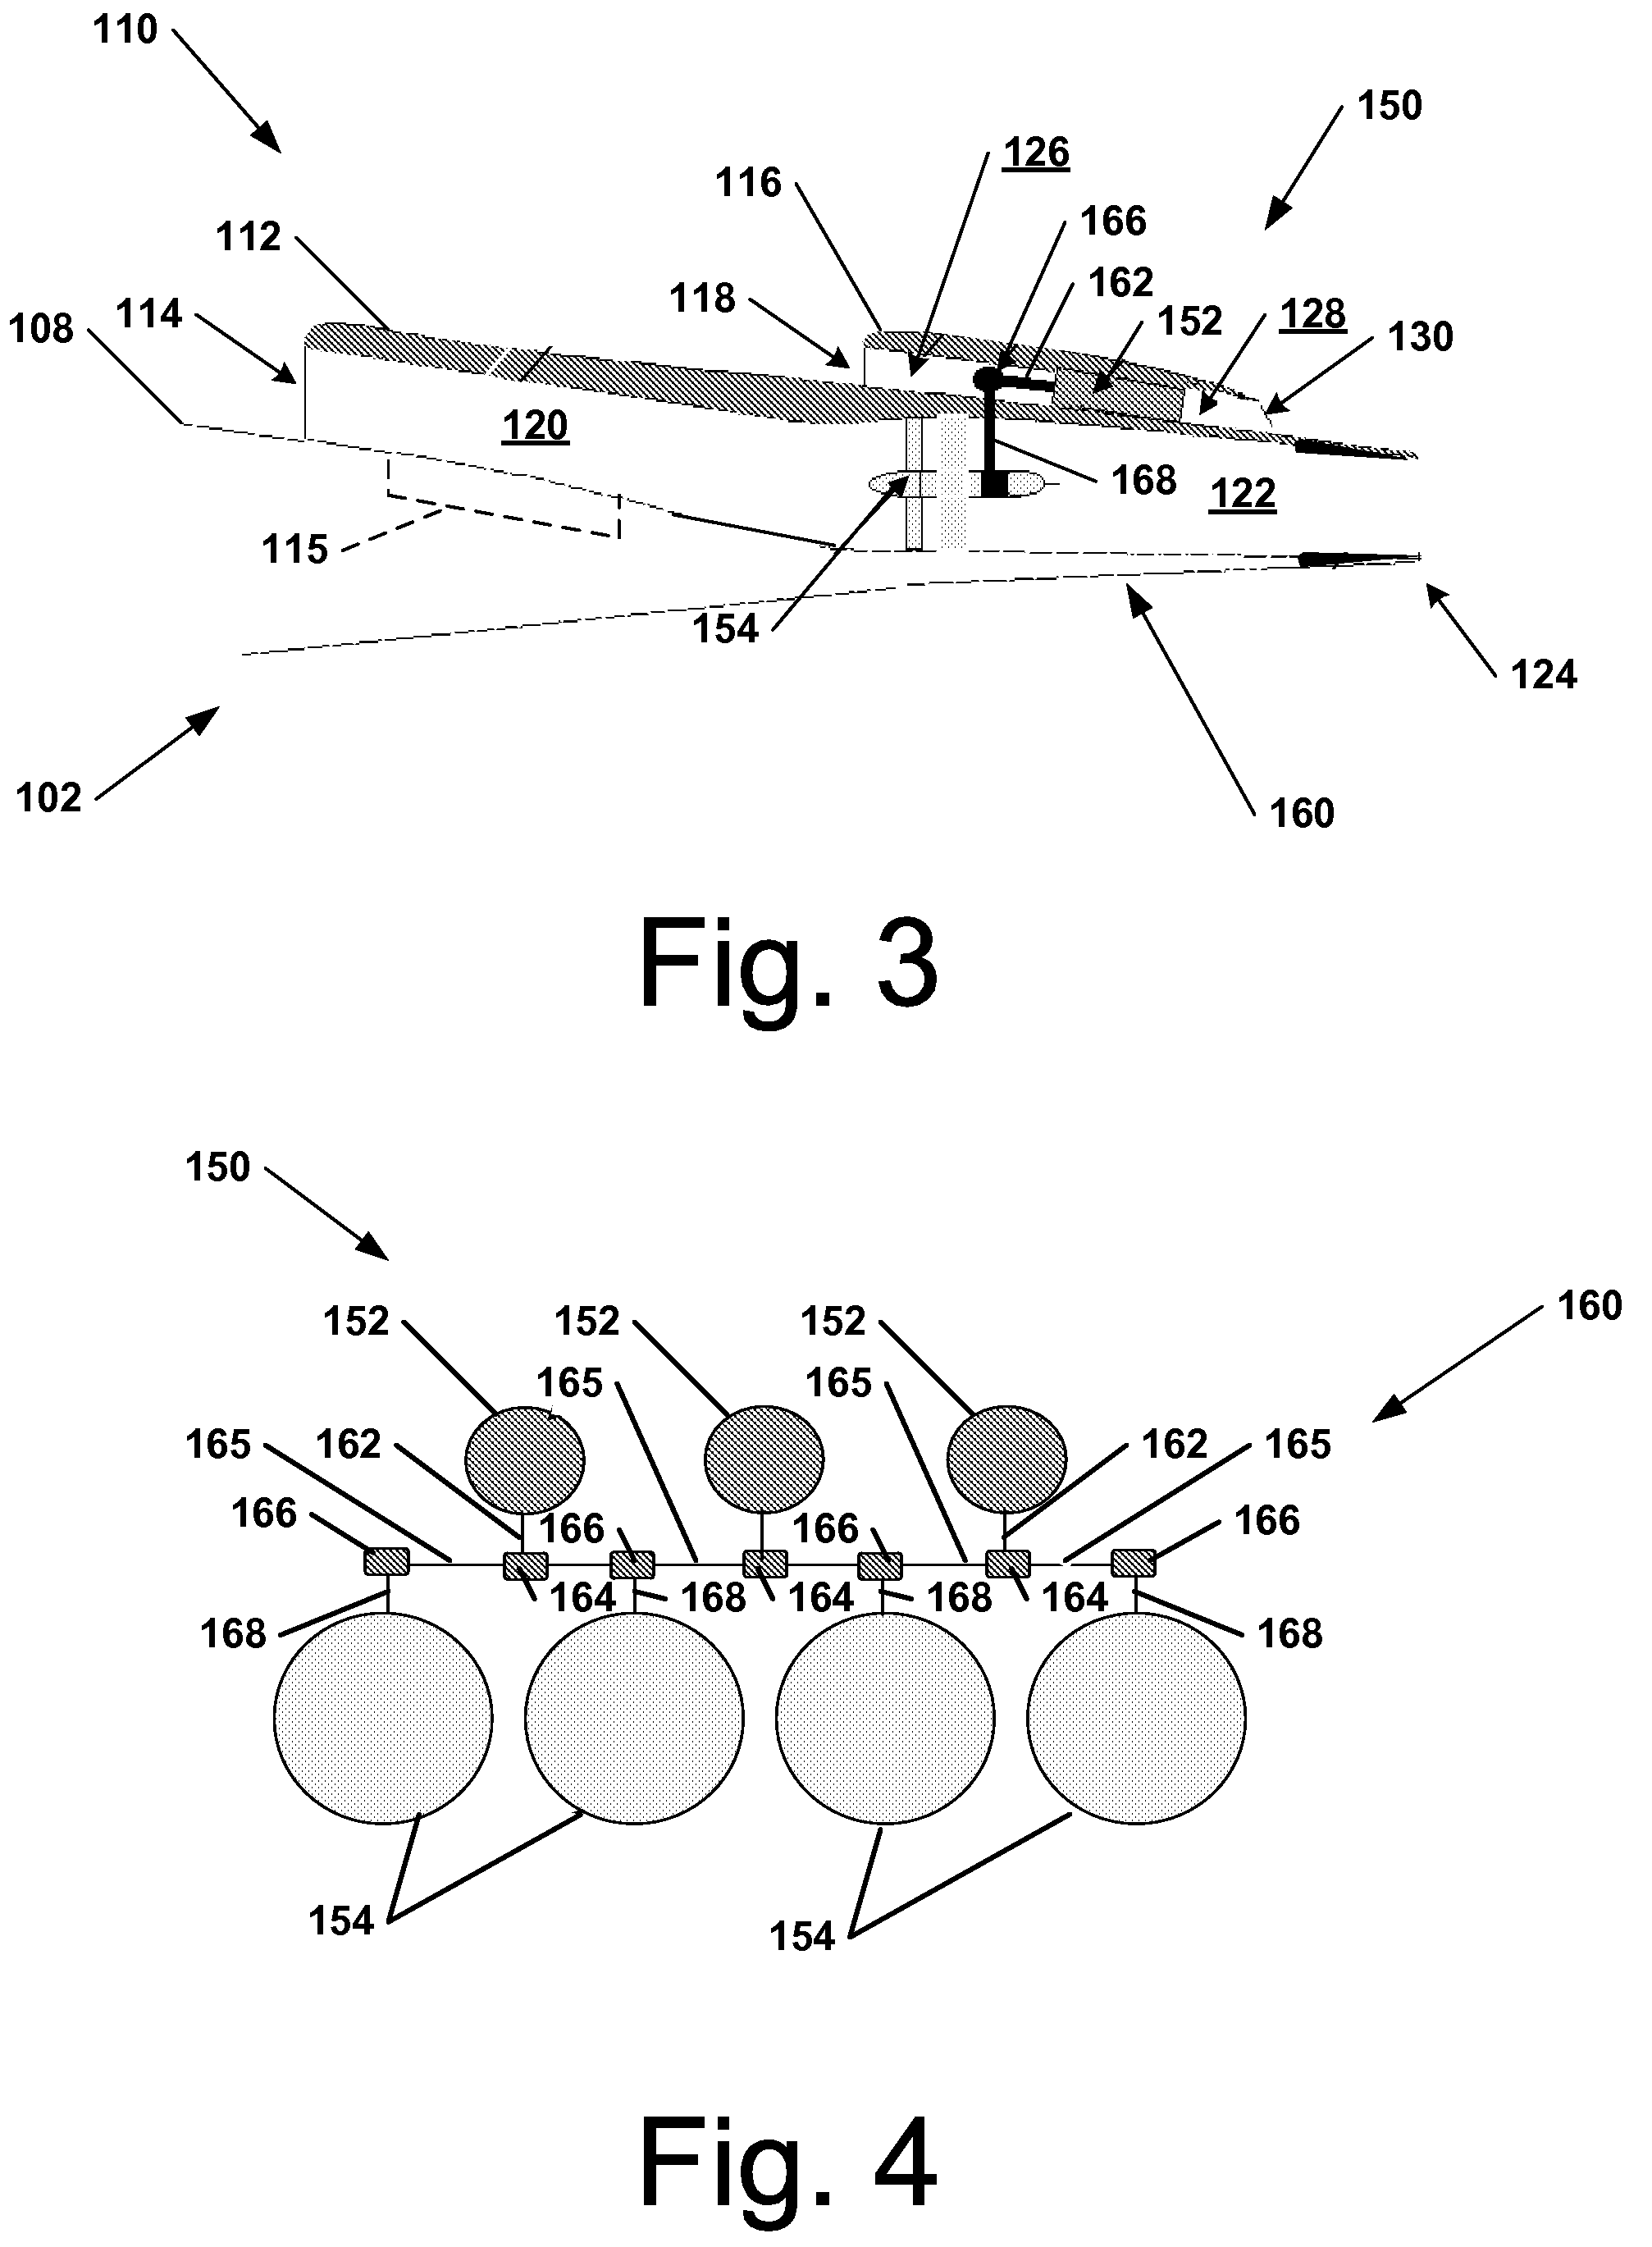 Unconventional integrated propulsion systems and methods for blended wing body aircraft